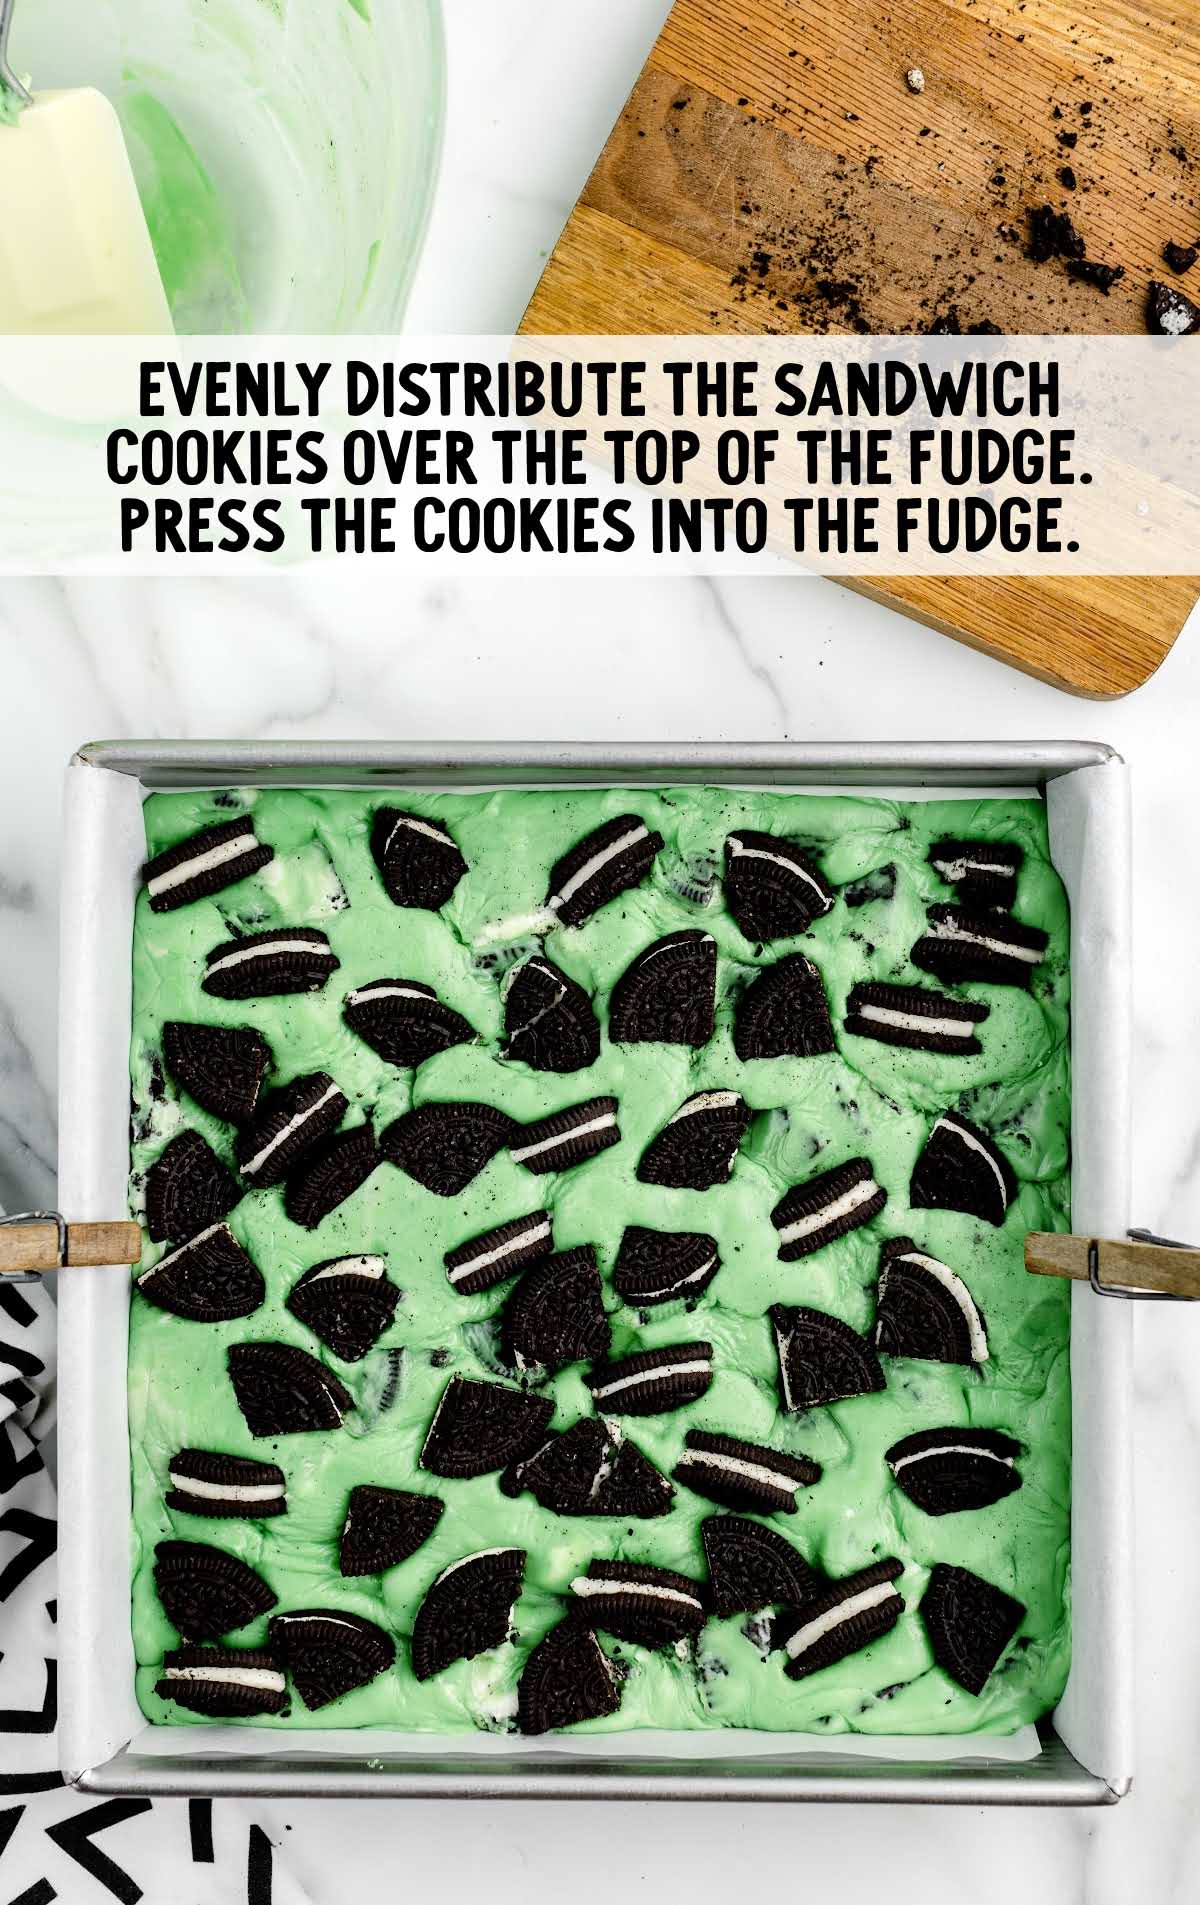 distribute the sandwich cookies over the top of the fudge